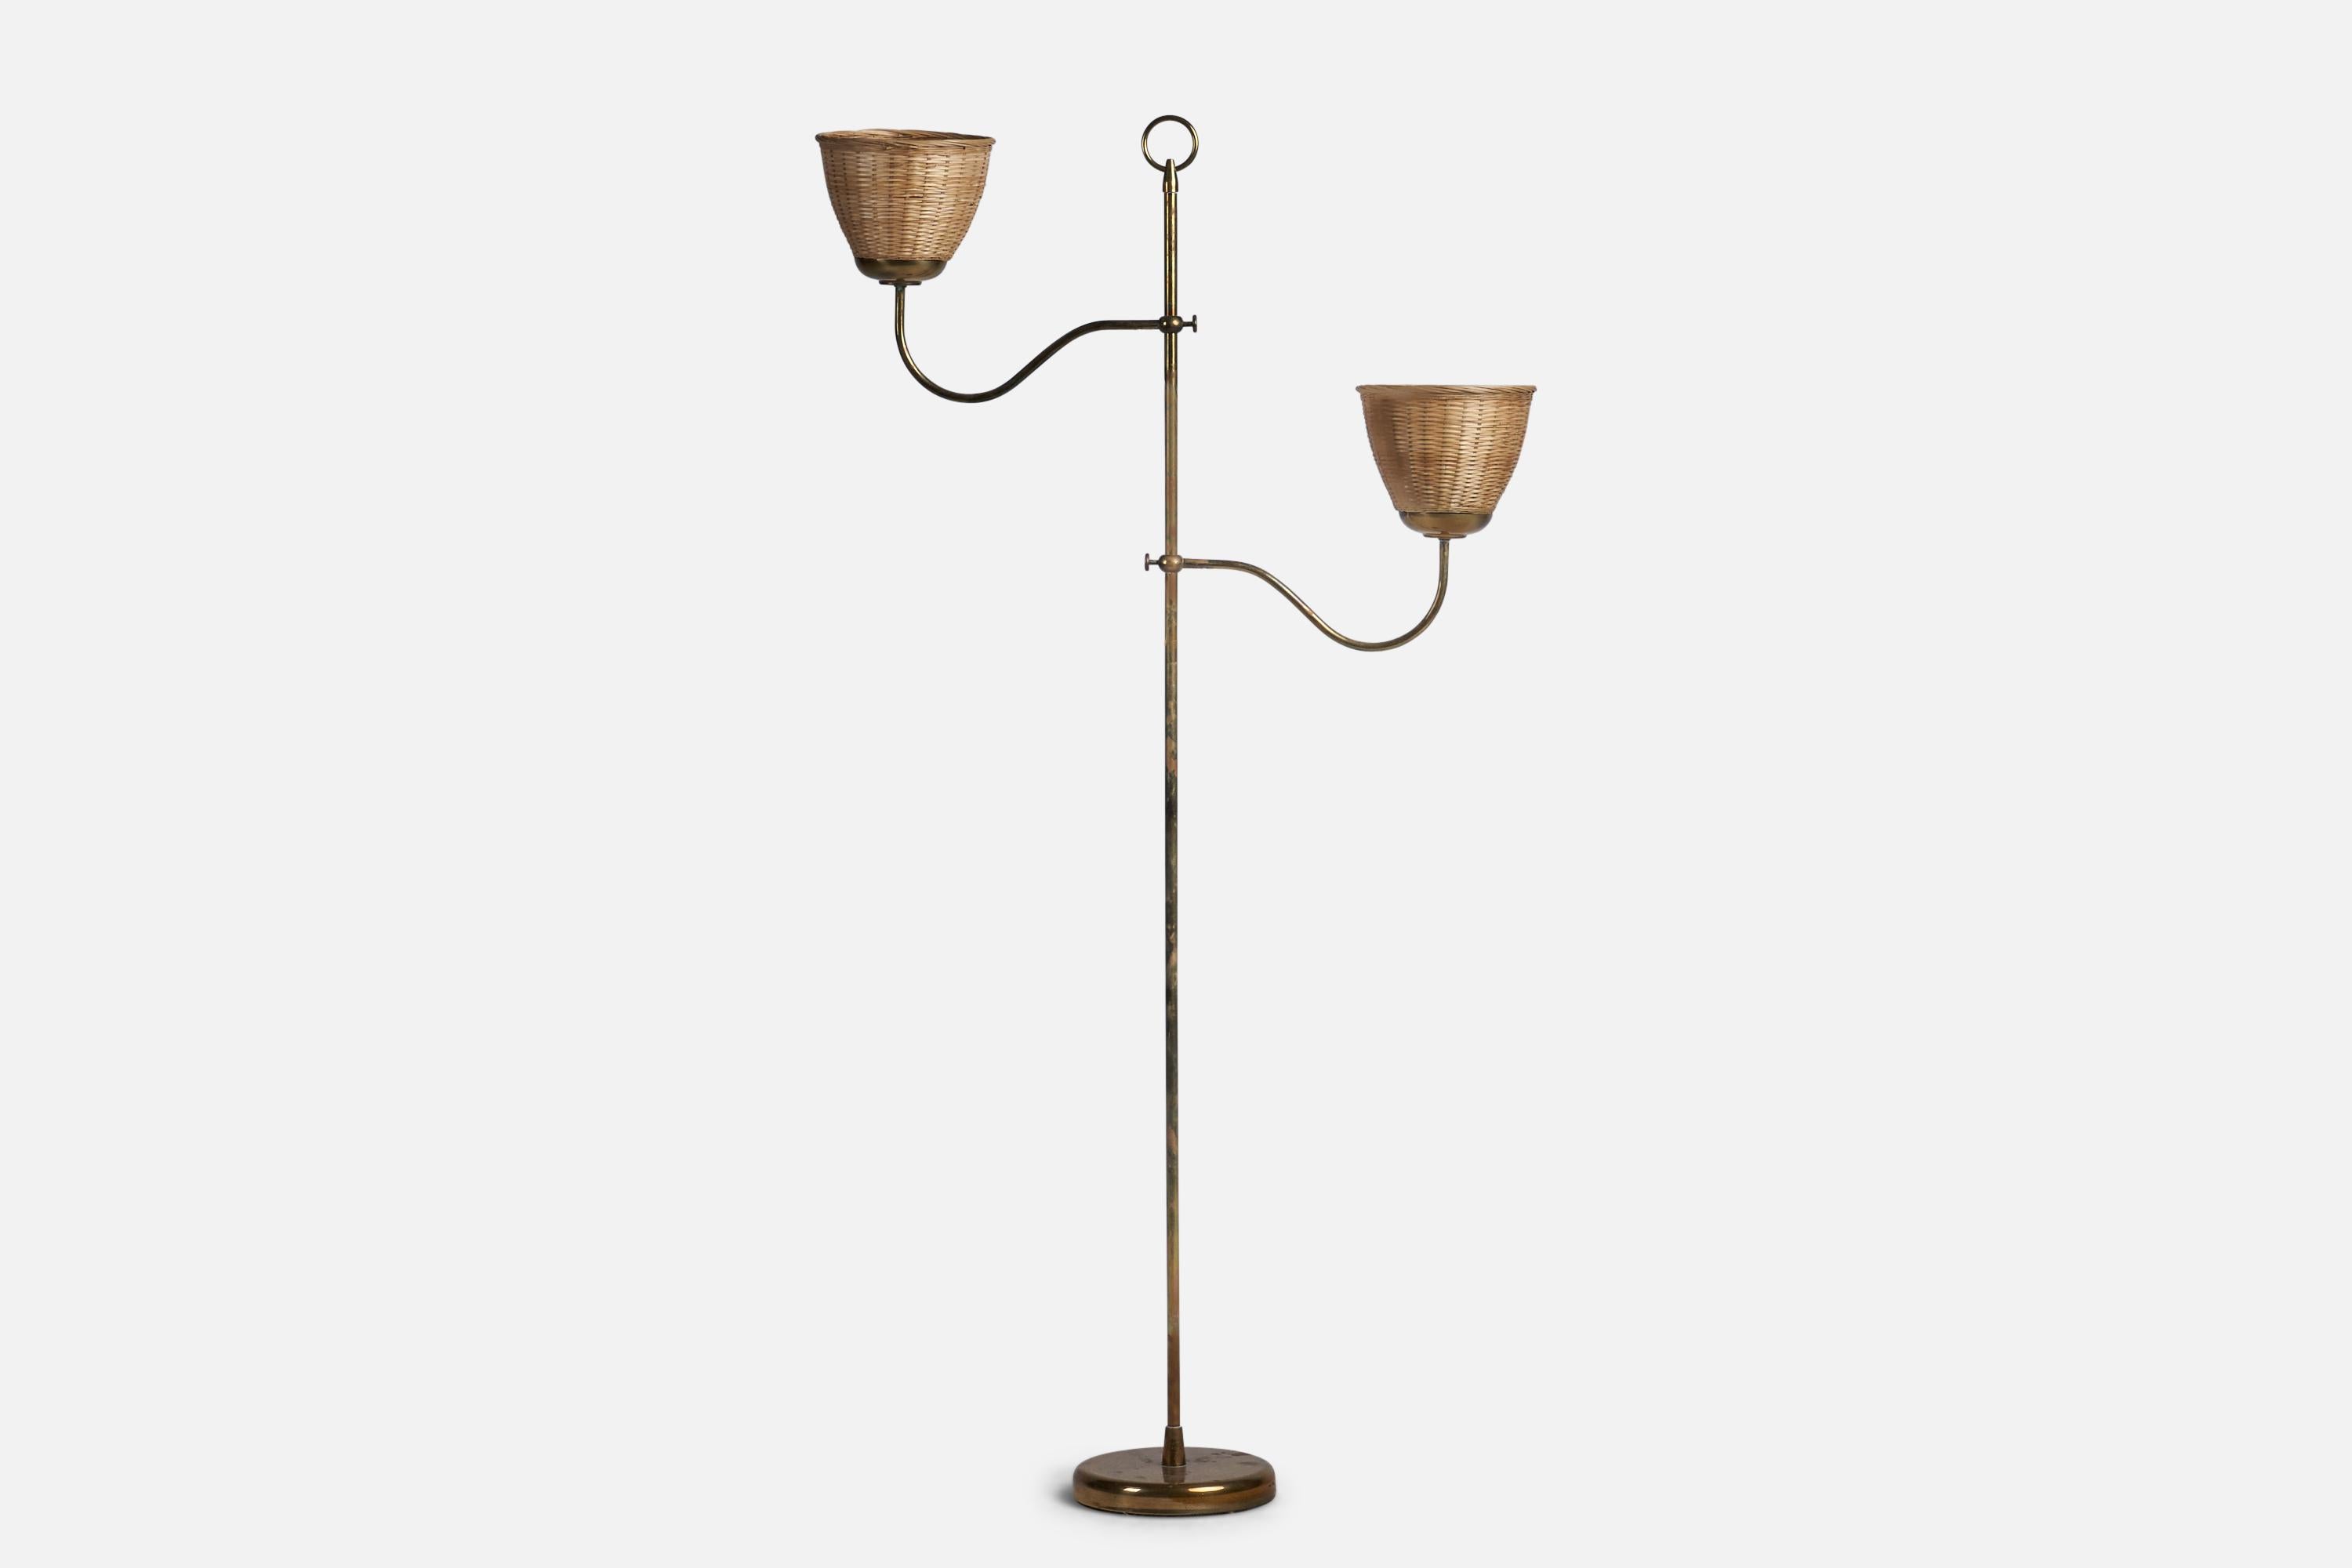 A brass and rattan floor lamp designed and produced in Austria, c. 1940s.

Overall Dimensions (inches): 51.75” H x 28” W x 7.5” D
Bulb Specifications: E-26 Bulb
Number of Sockets: 2
All lighting will be converted for US usage. We are unable to